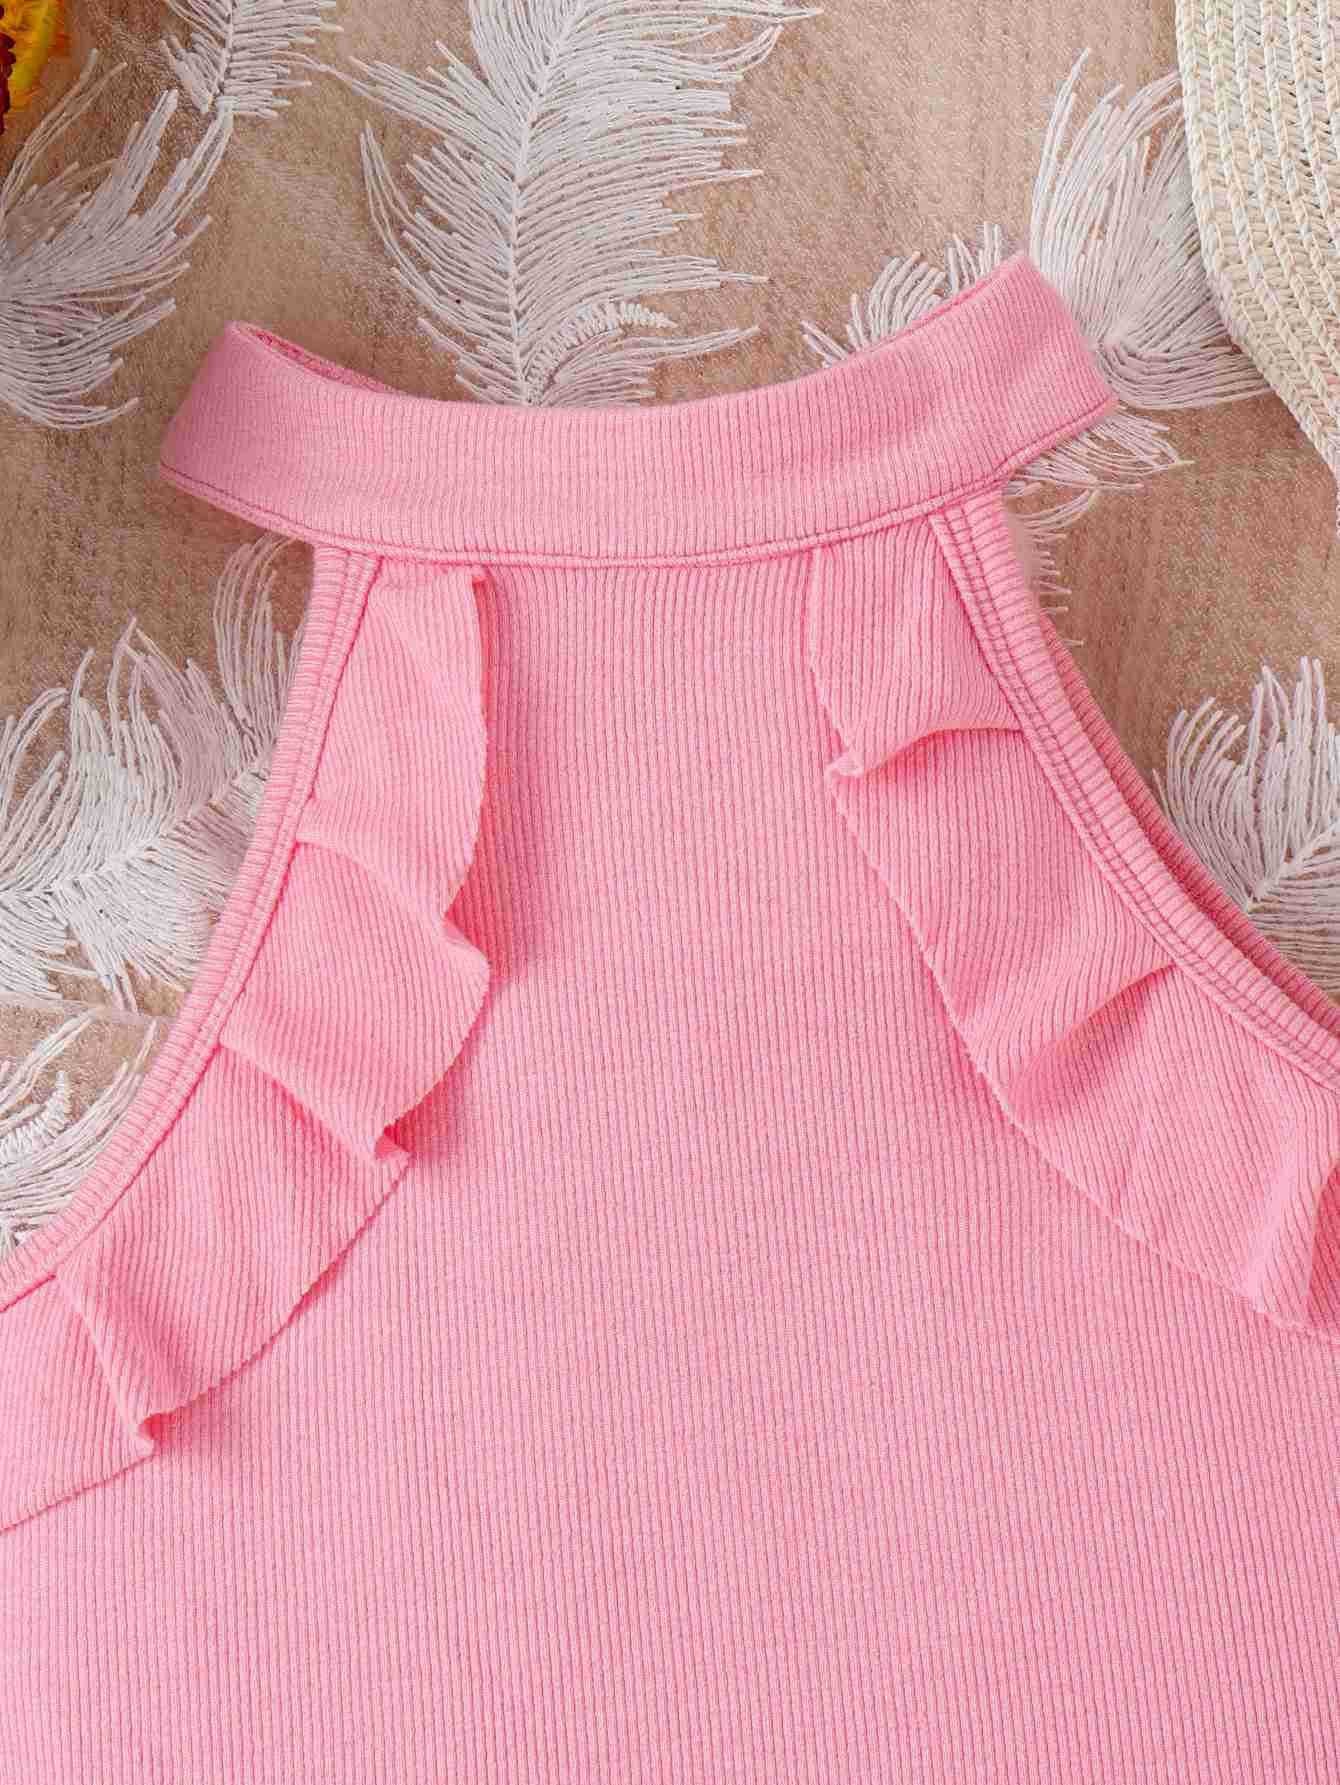 Women Outfits With Pale Pink Shorts  Pink top outfit, Pale pink tops, Light  pink shorts